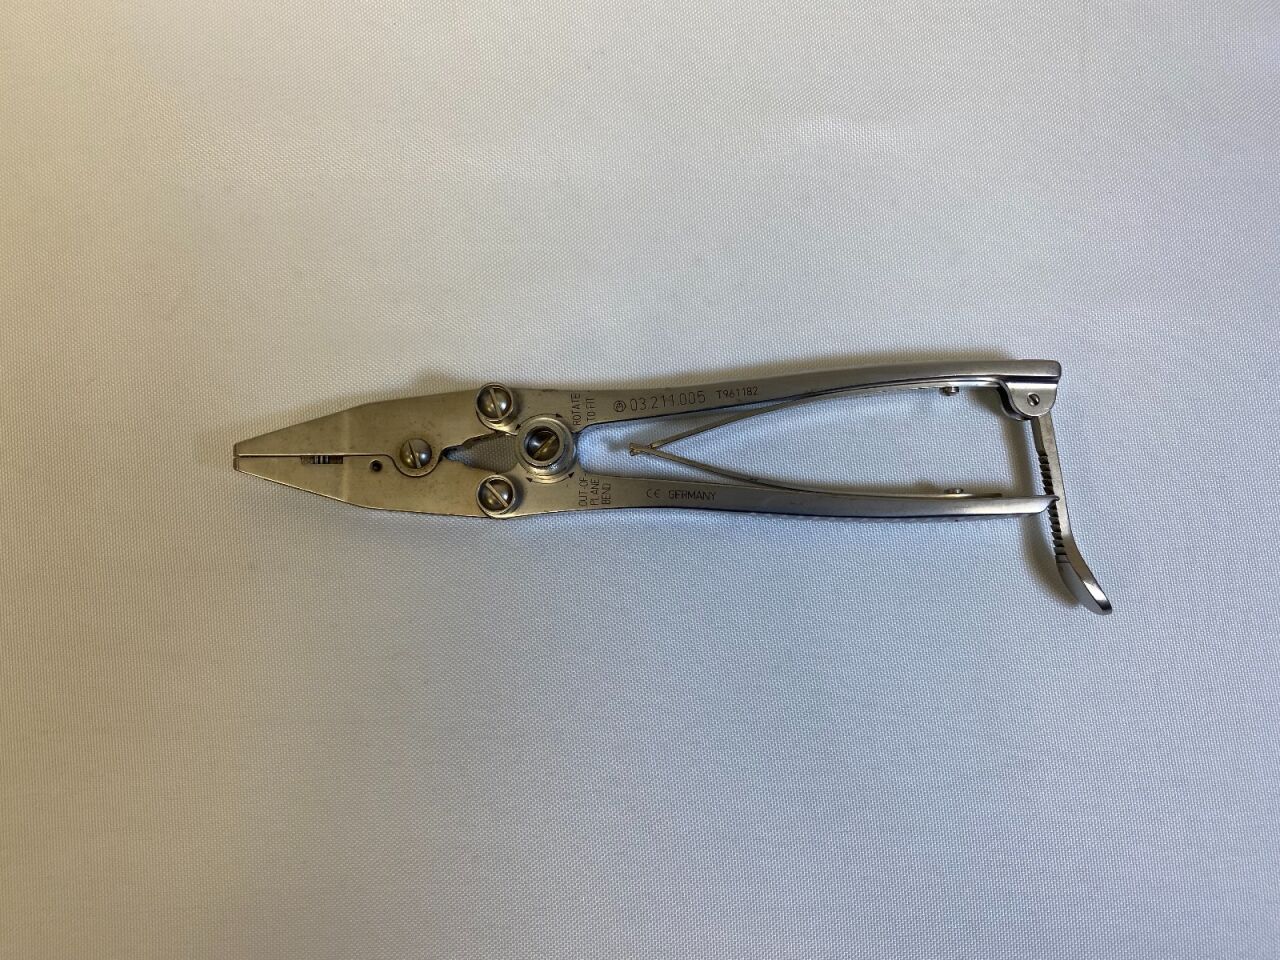 03.211.005 Plate Bending Pliers for VA Locking Plates US363